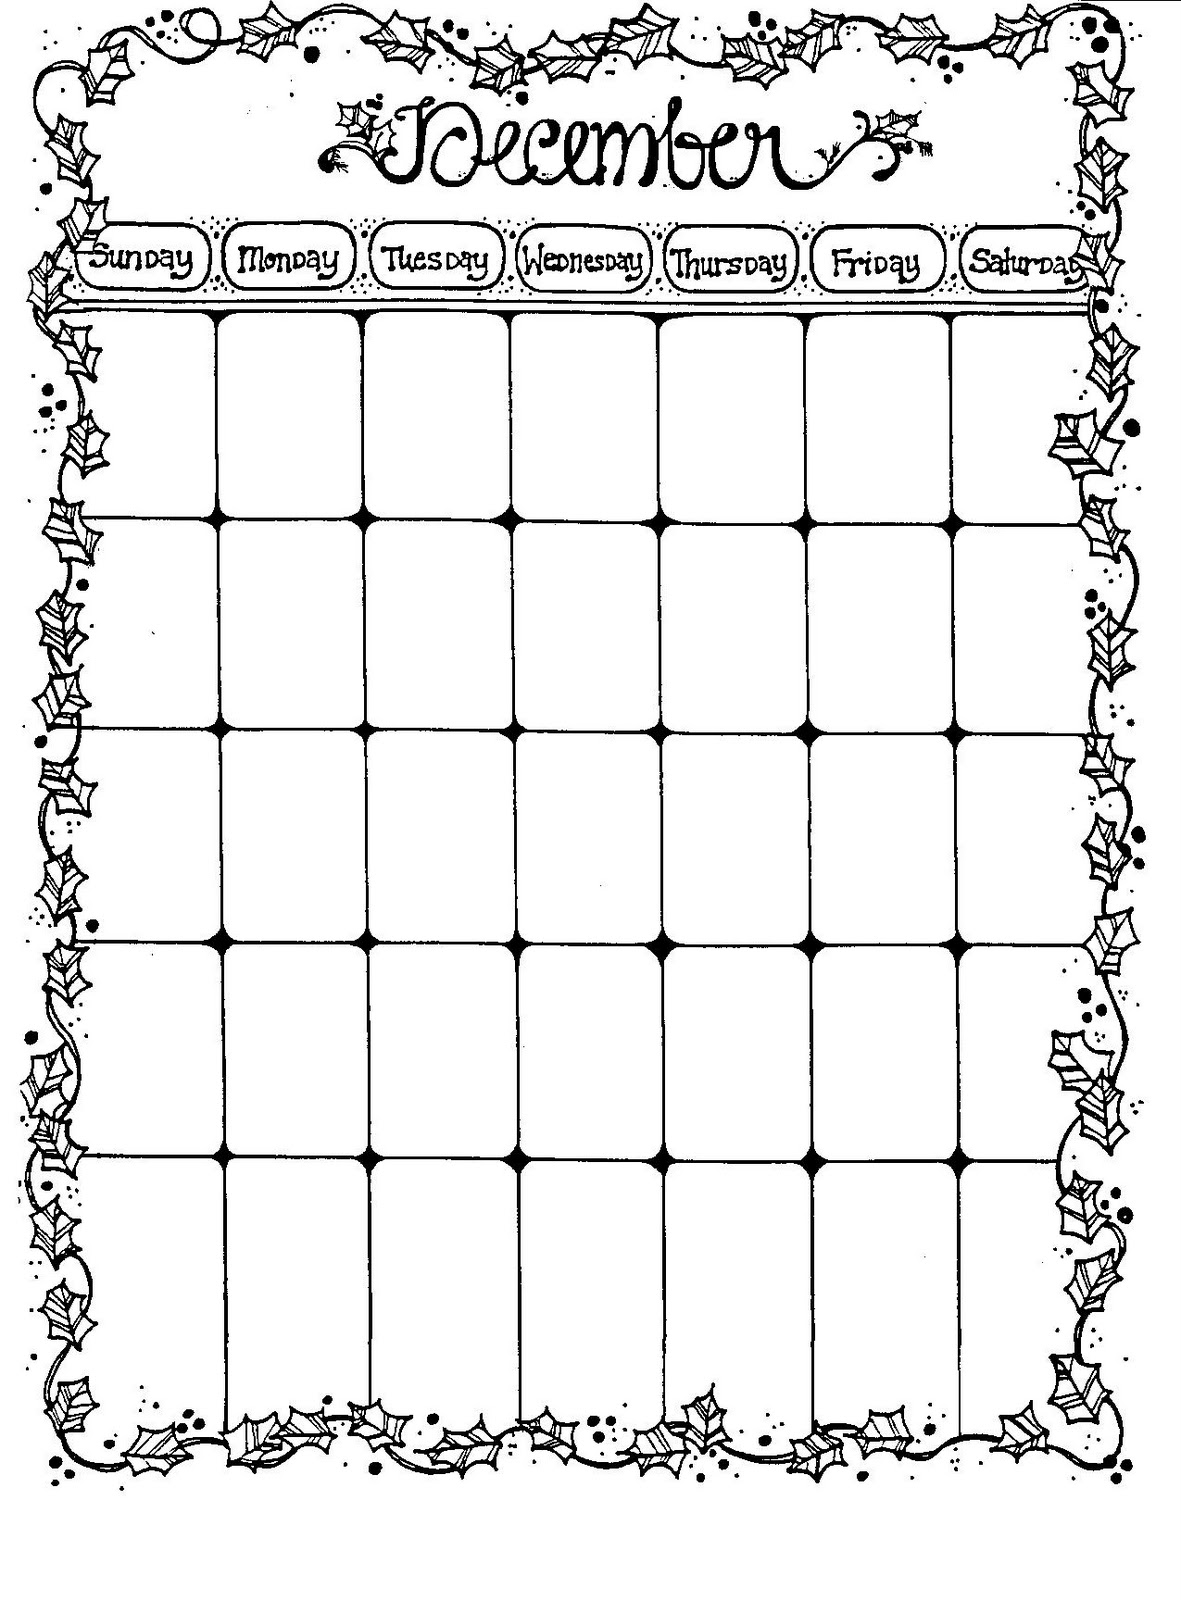 connie-s-file-cabinet-monthly-blank-calendar-pages-for-a-year